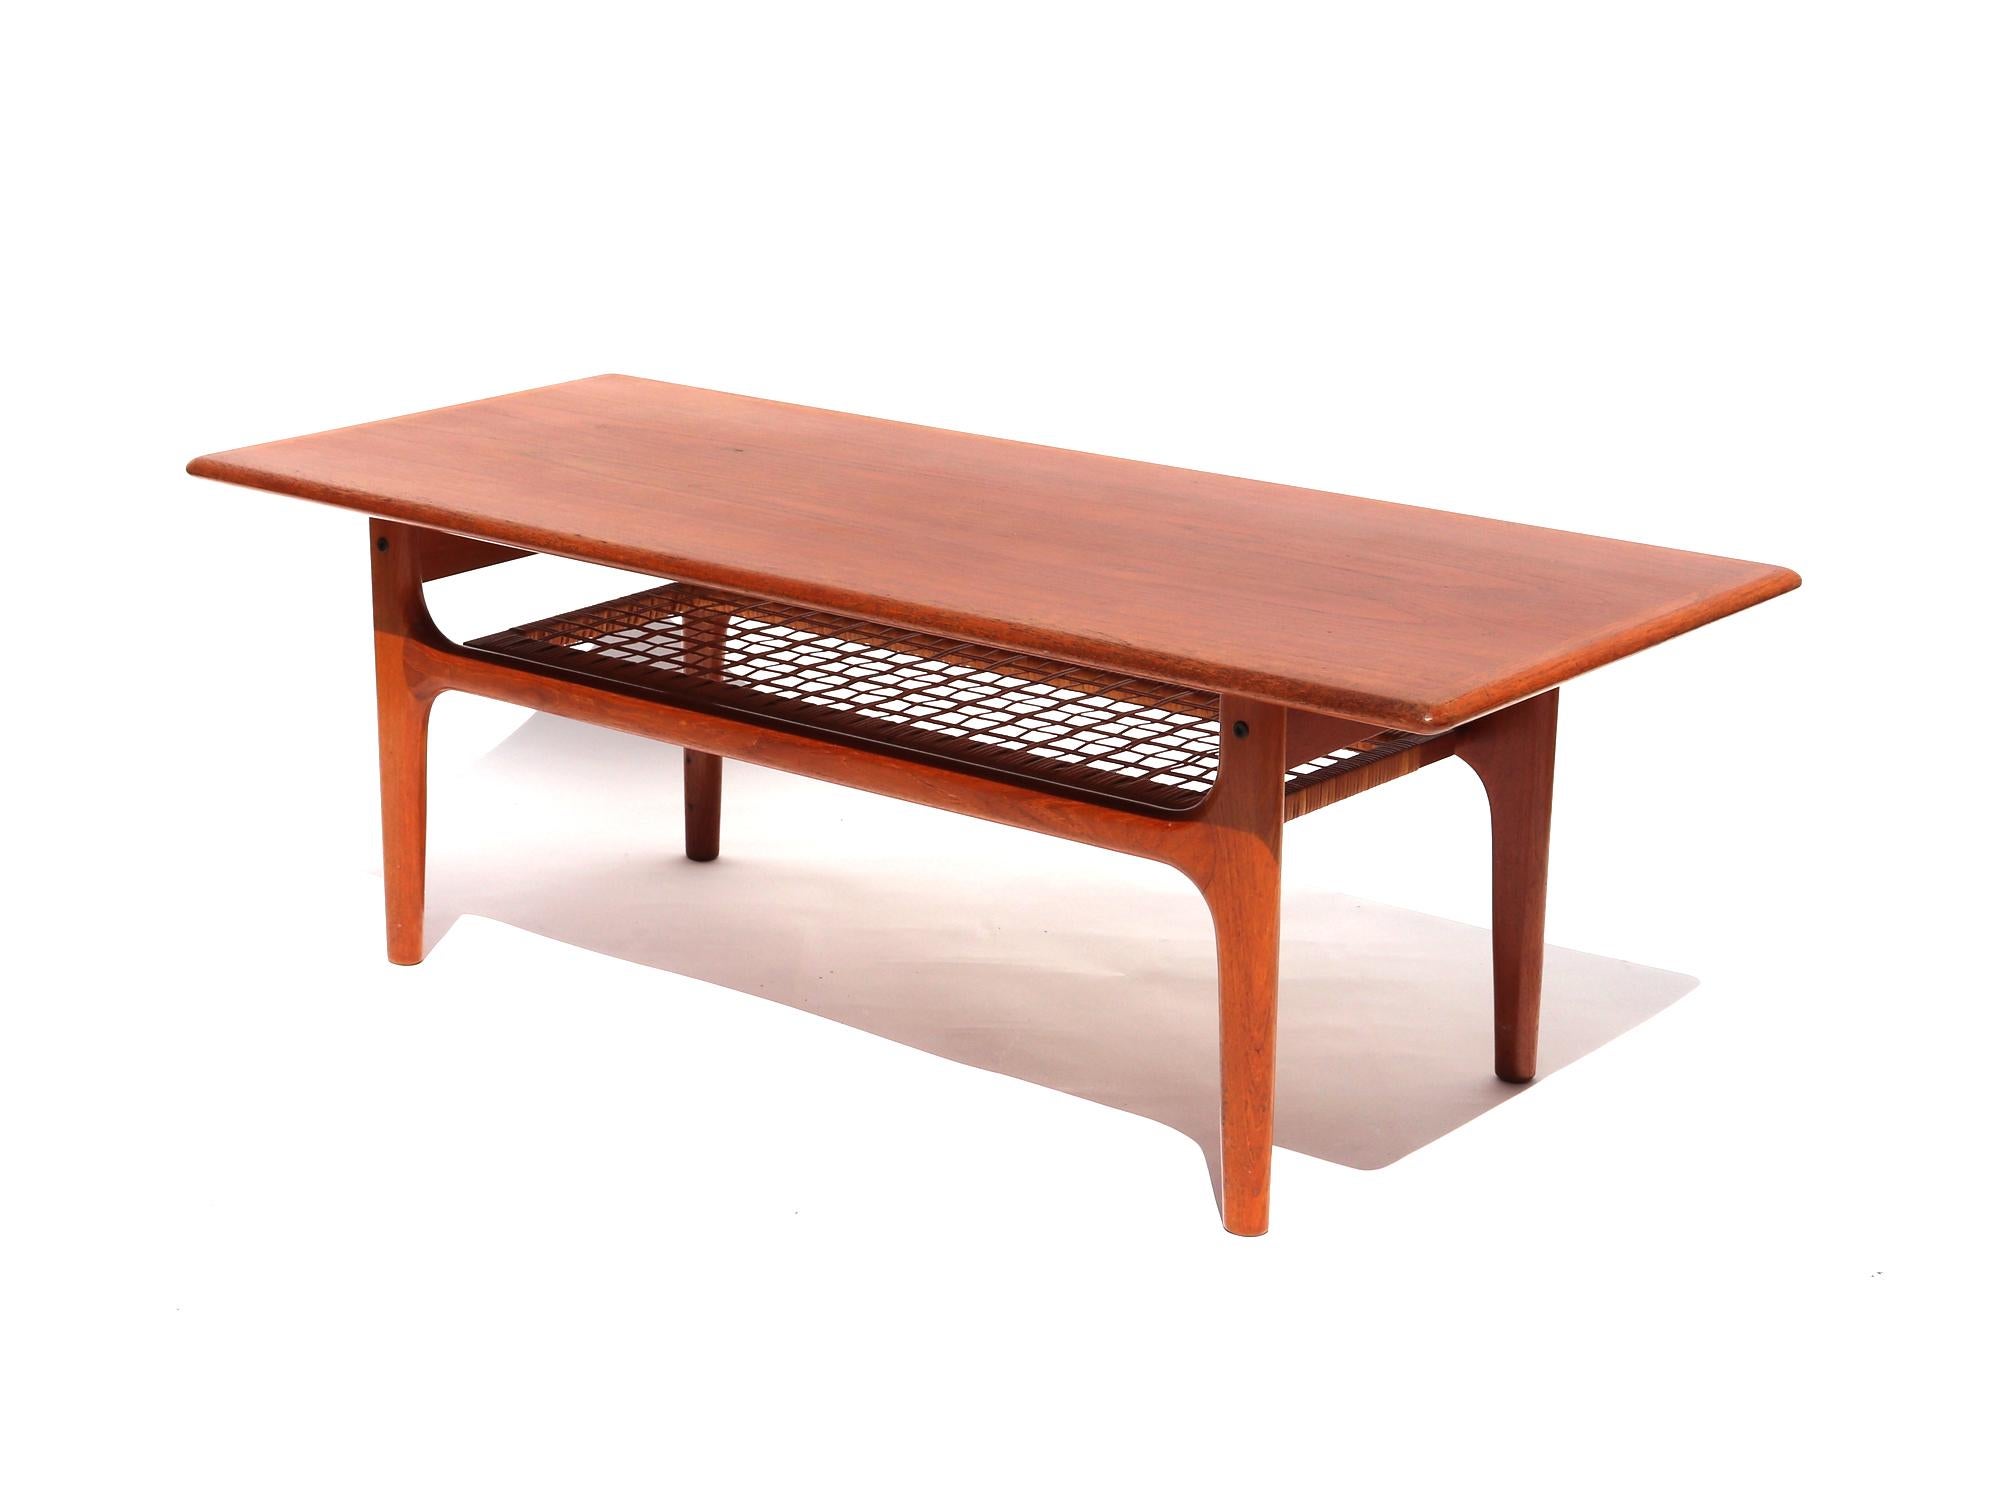 Trioh Danish Modern coffee table,
1960s

Trioh Danish modern coffee table of rectangular form with a lower woven cane shelf. 

Classic, clean styling in this Danish modern coffee table – woven cane shelf adds additional interesting textural